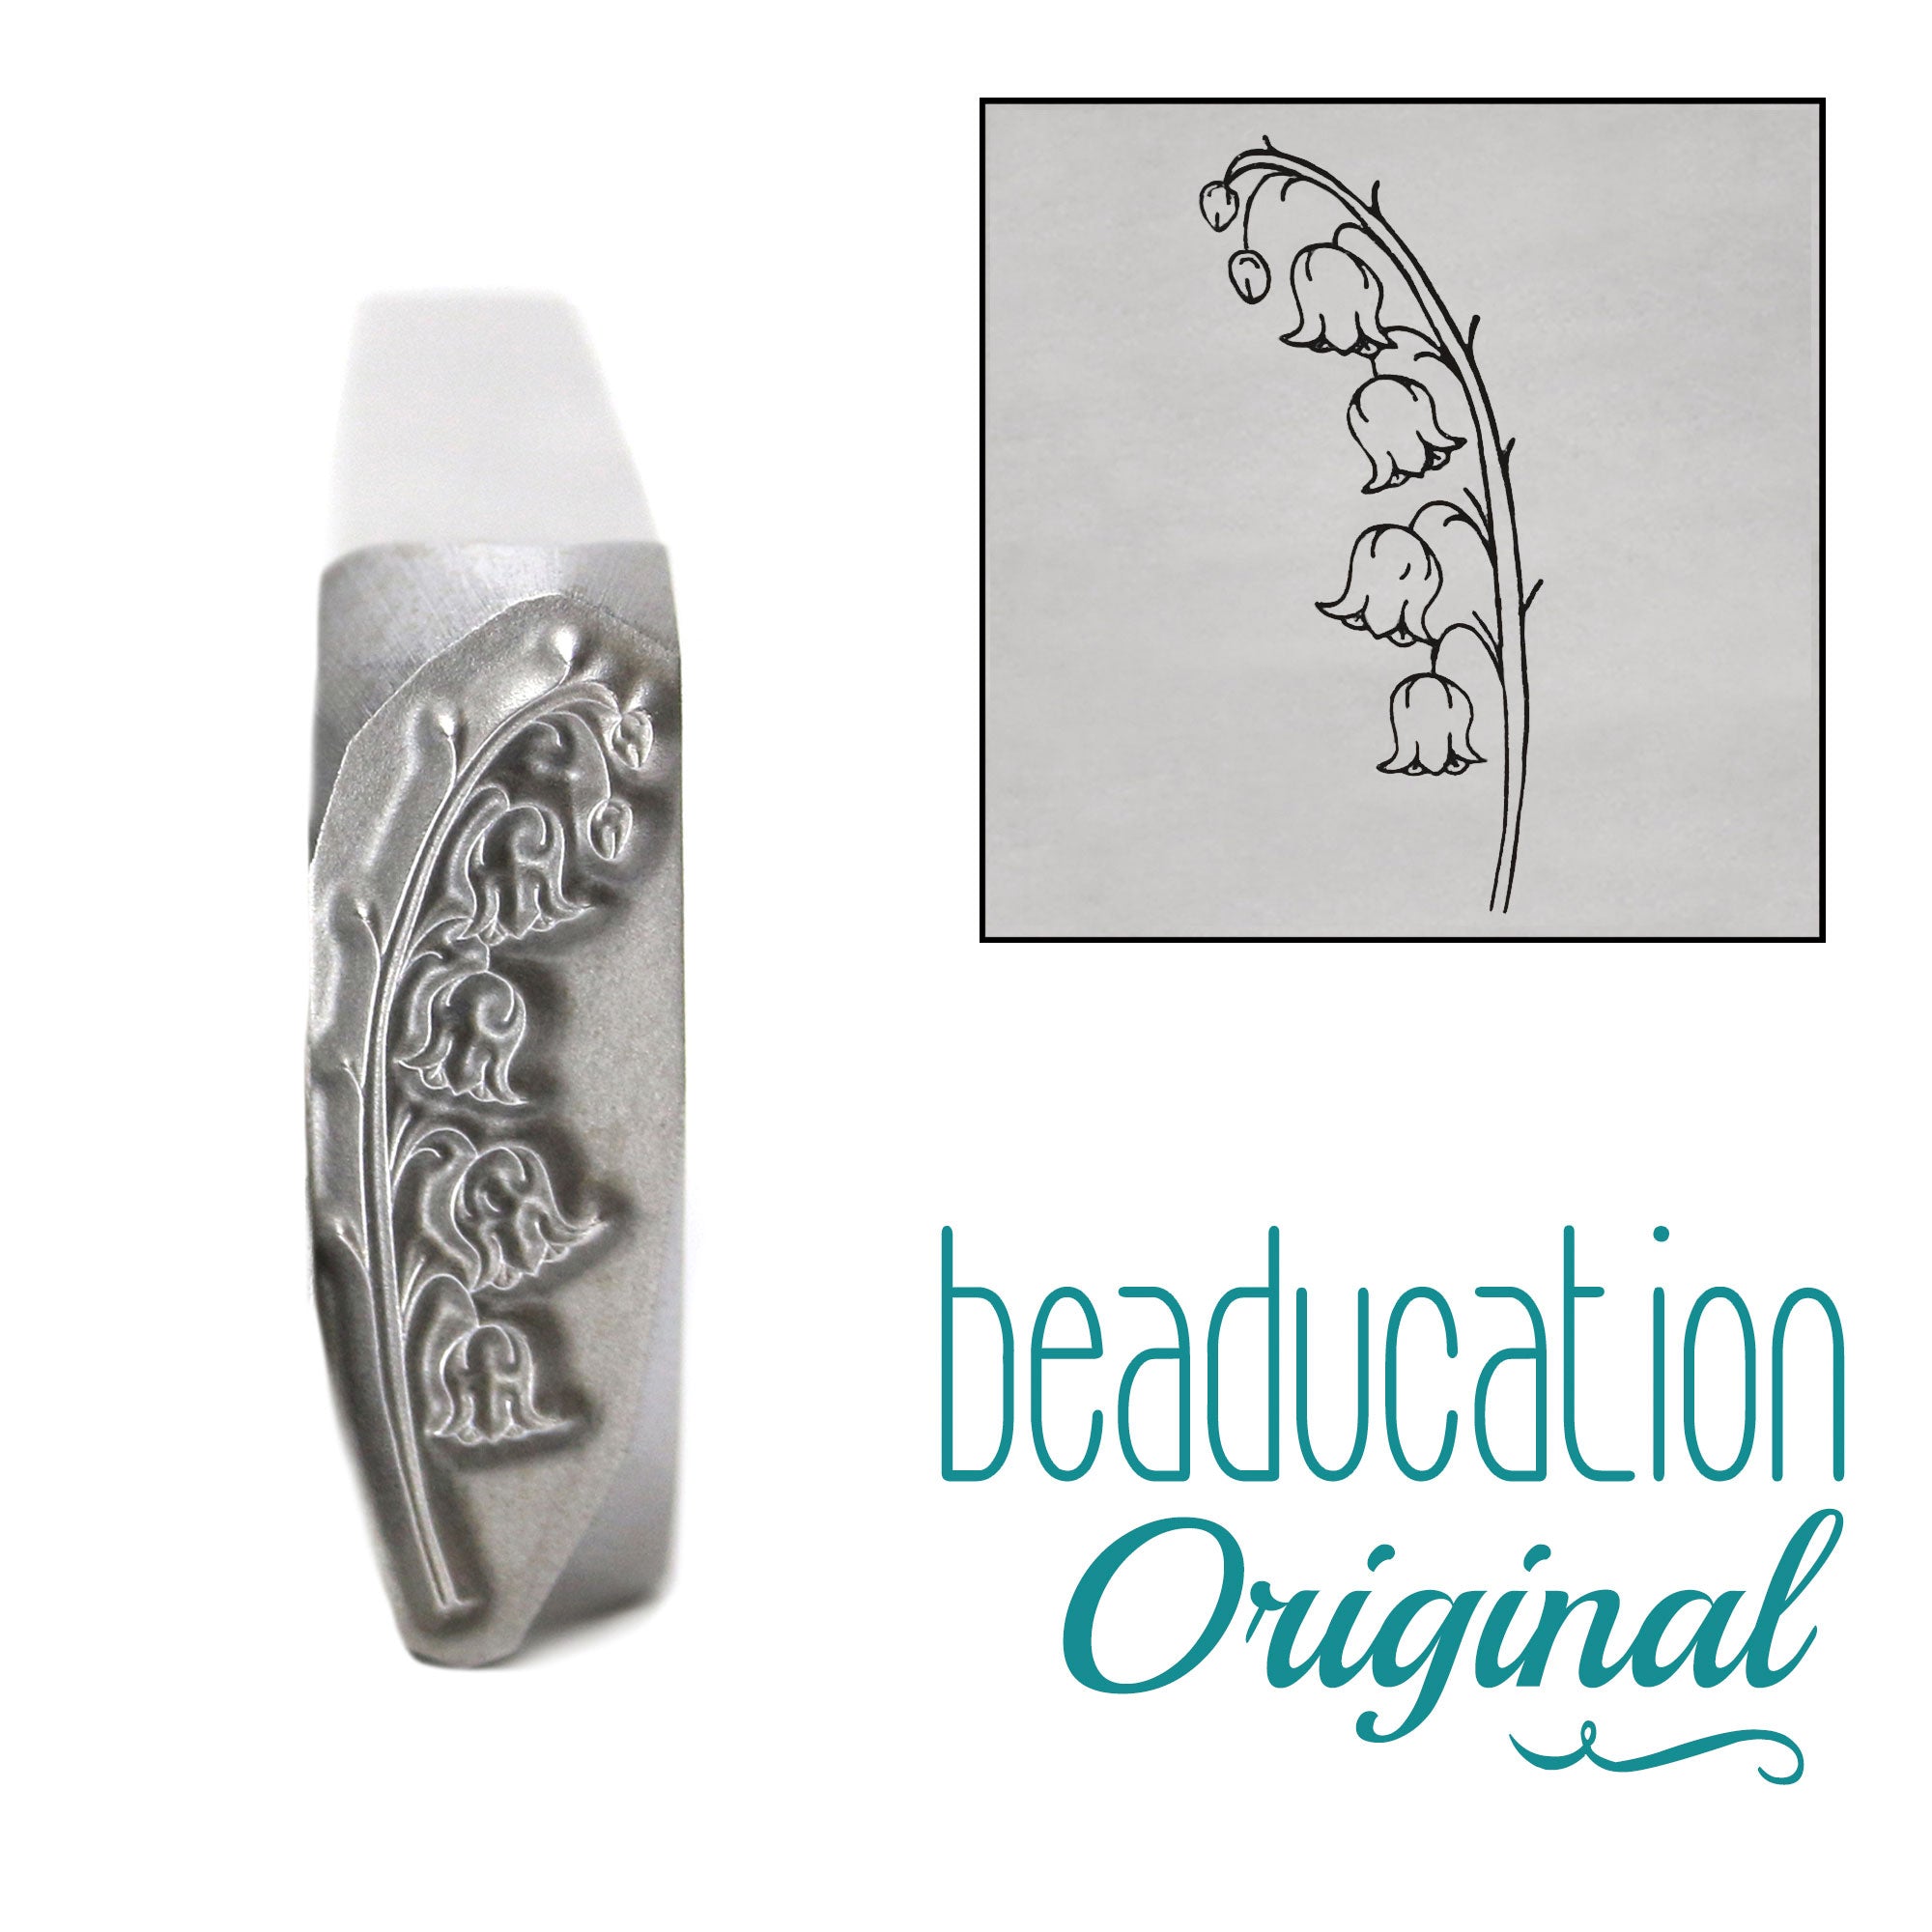 Open Wing Butterfly Metal Design Stamp, 17mm - Beaducation Original